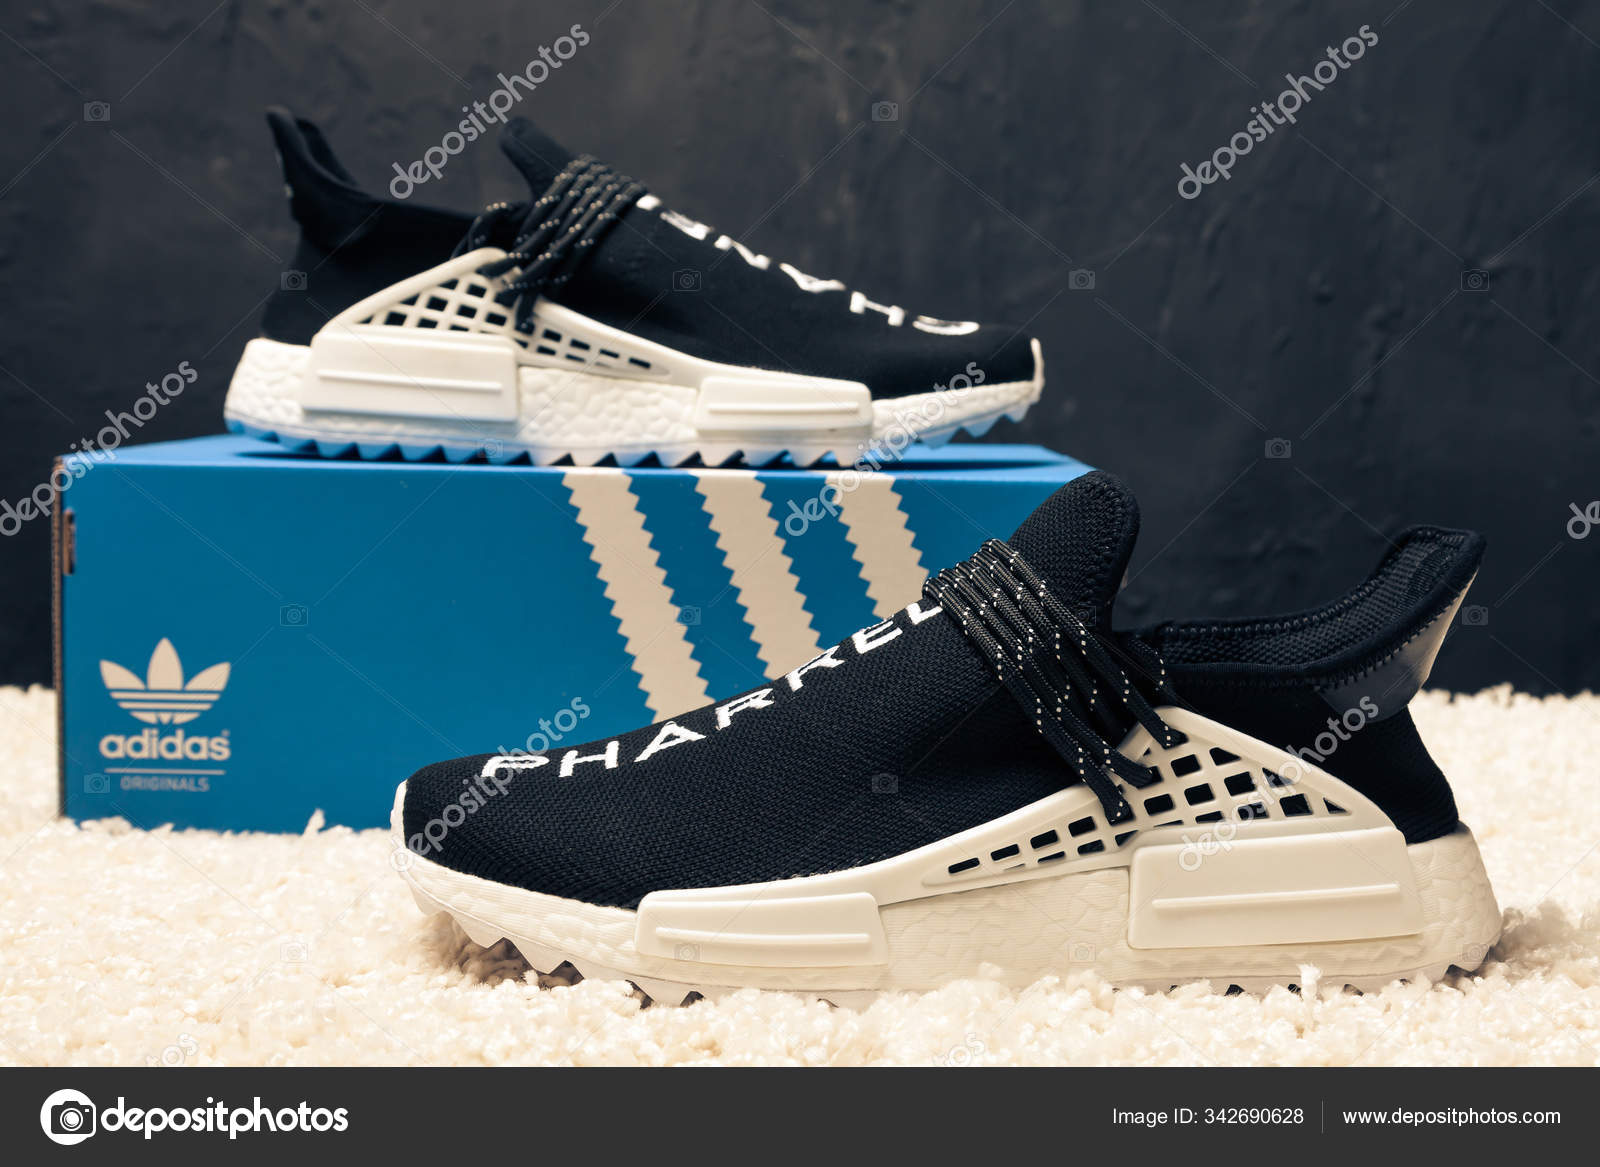 New Beautiful Colorful Nice Adidas Chanel Running Shoes Sneakers